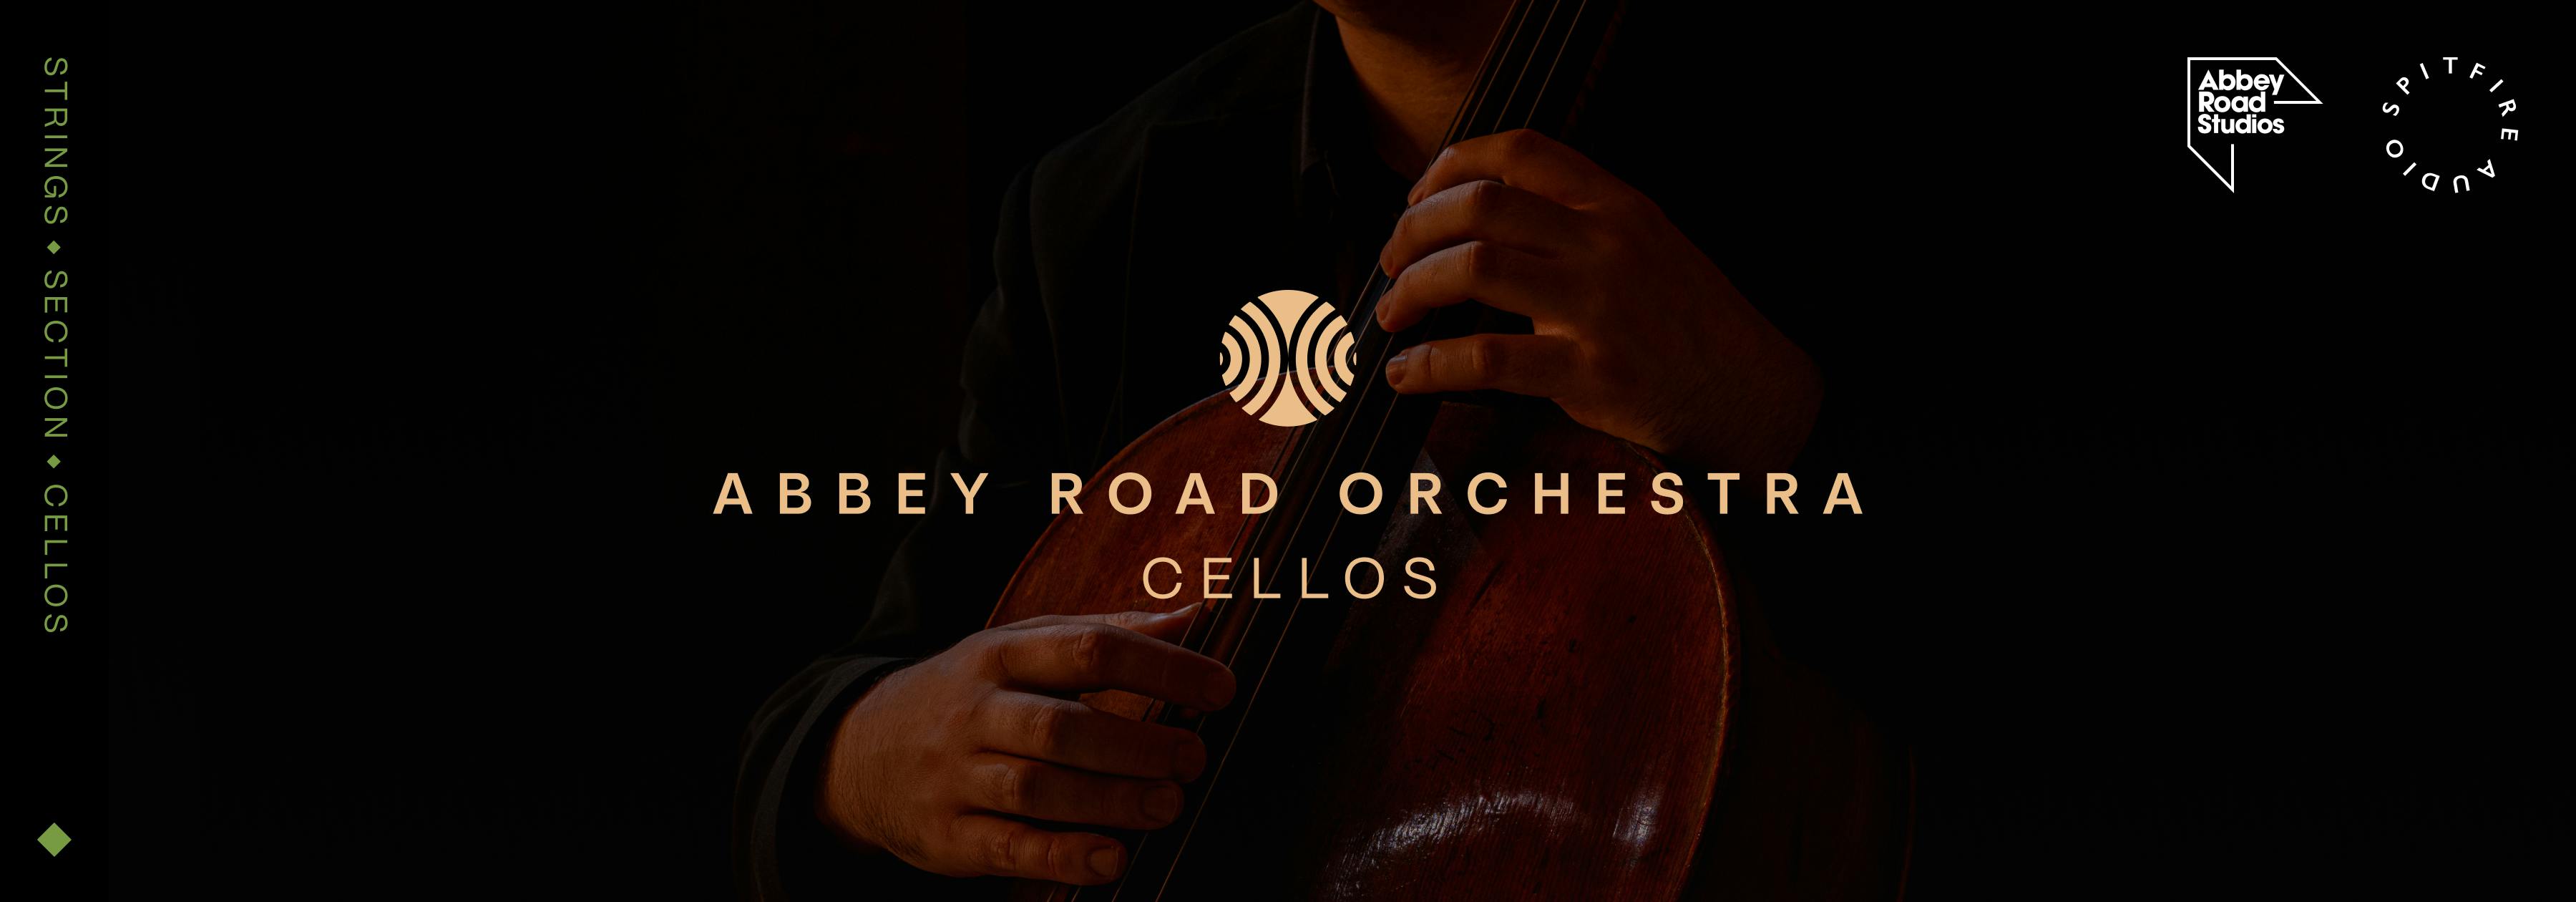 Abbey Road Orchestra Cellos